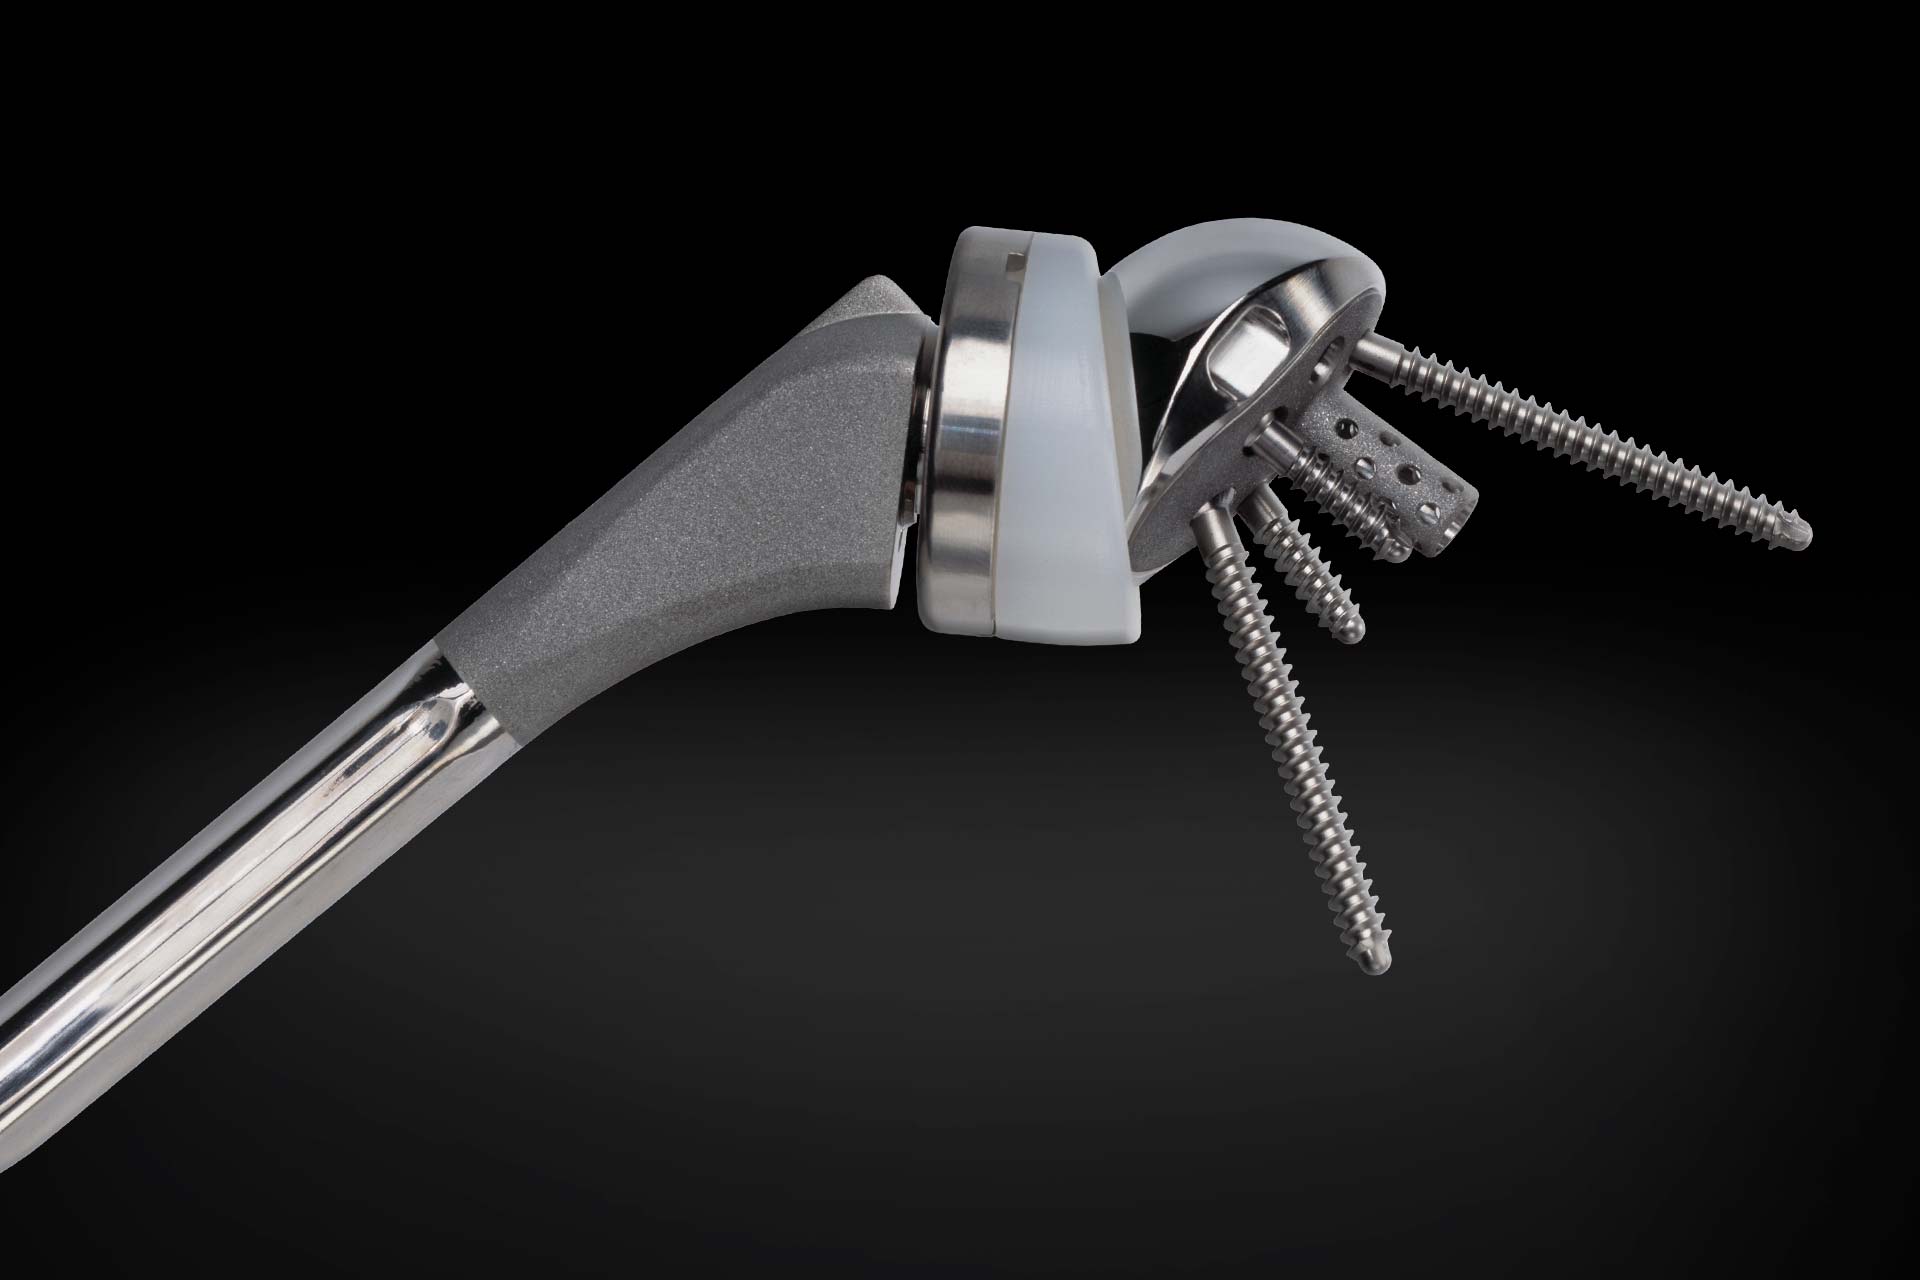 FDA issues warning over Exactech shoulder implants at risk of oxidation